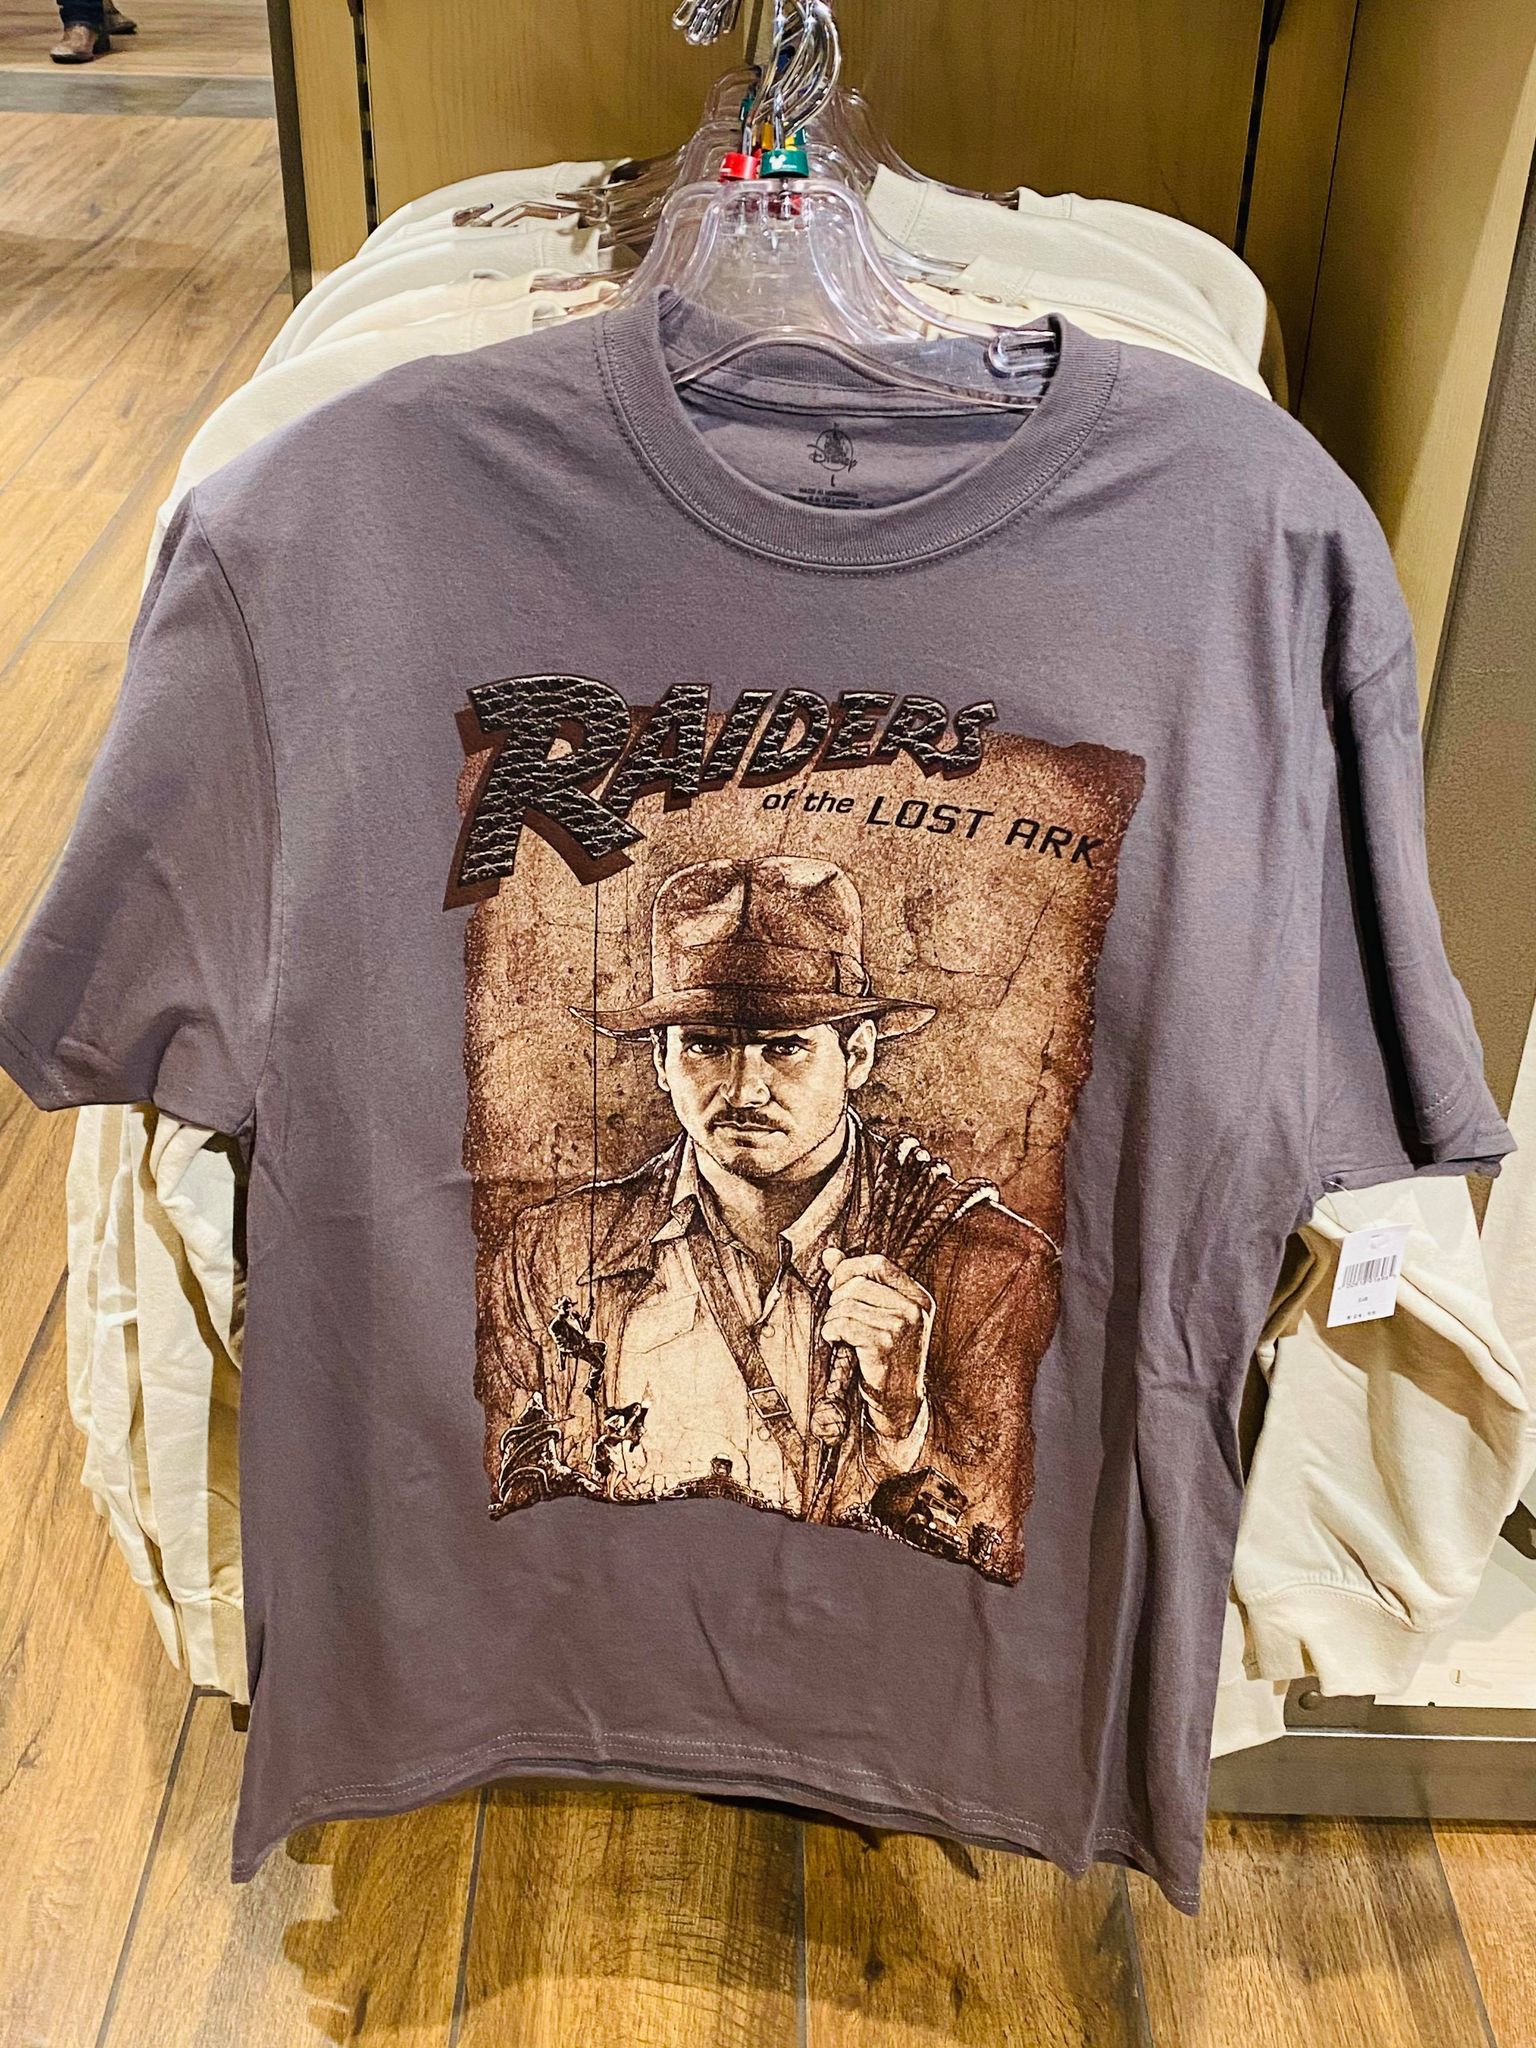 Two NEW Indiana Jones Shirts Have Rolled In! Disney Fashion Blog